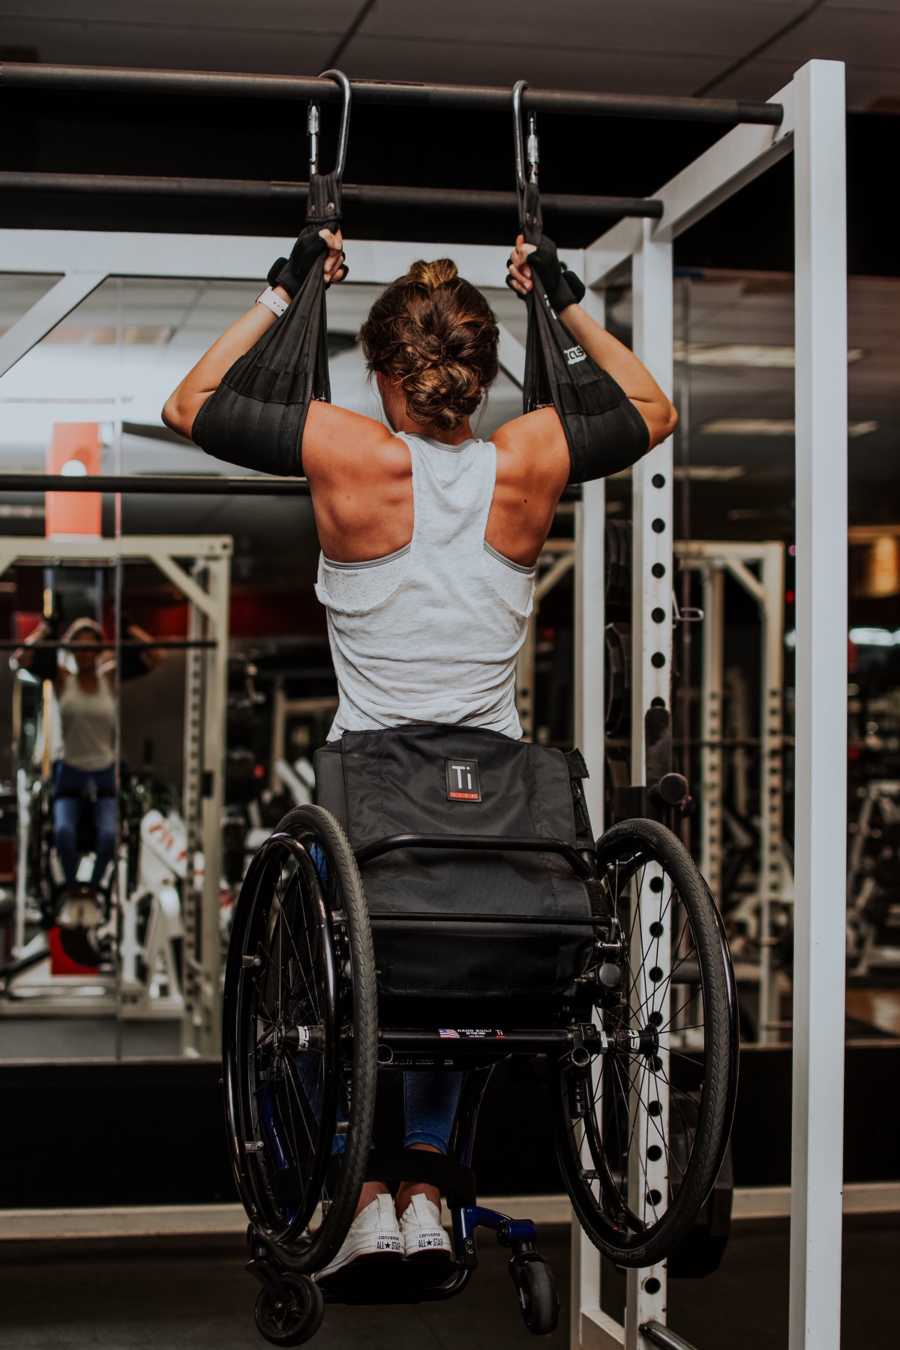 Woman who was paralyzed from waist down does pull-ups while in wheelchair